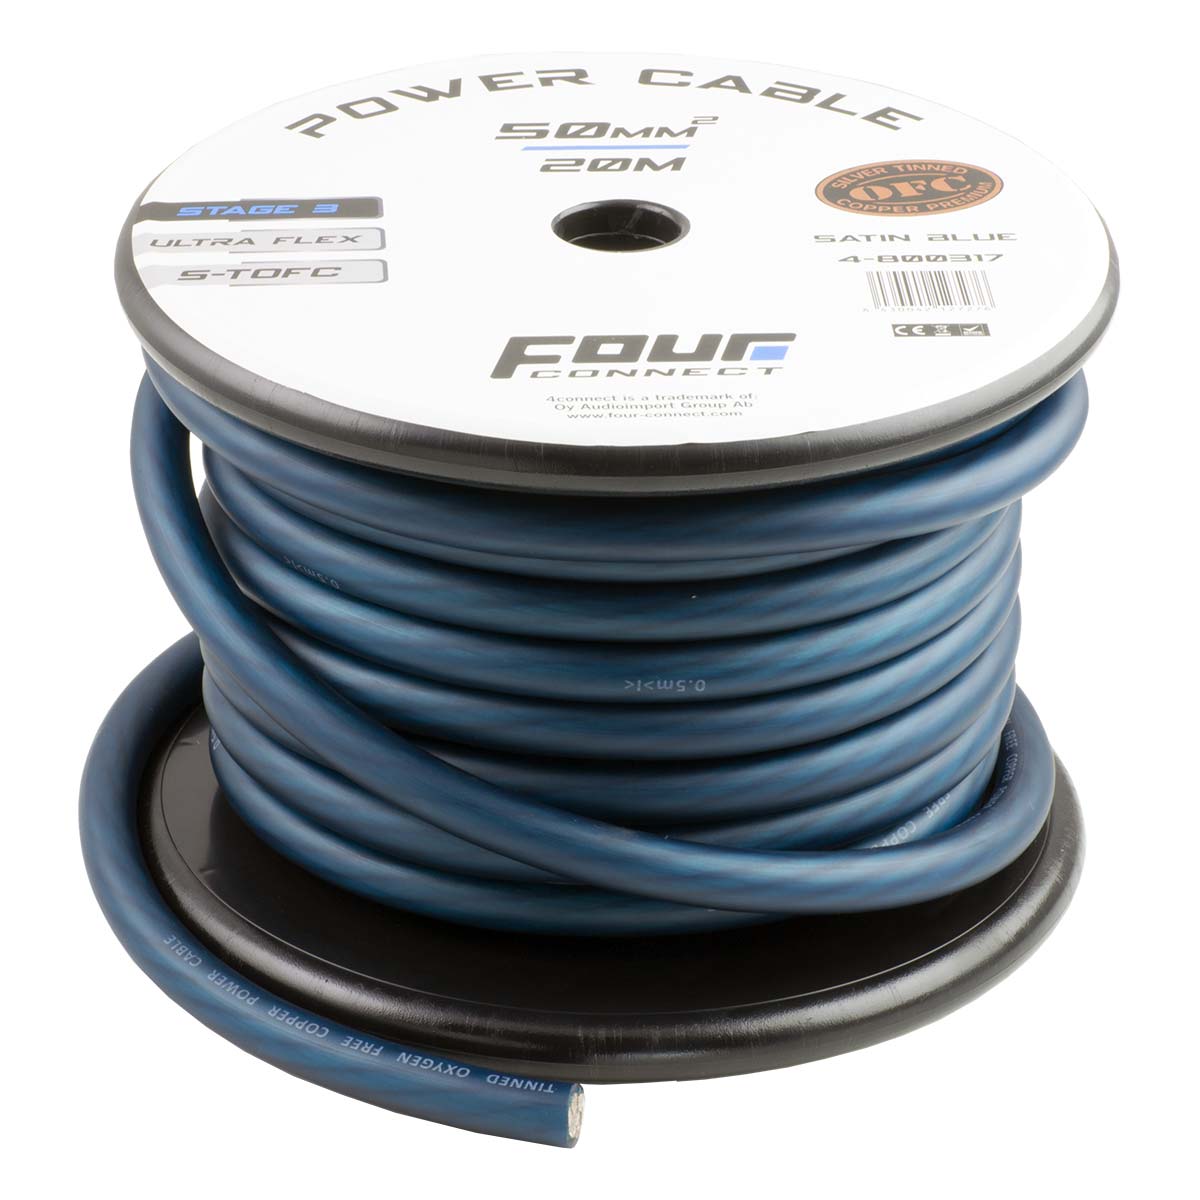 FOUR Connect 4-800317 STAGE3 50mm2 Satin Blue S-TOFC power cable, 20m